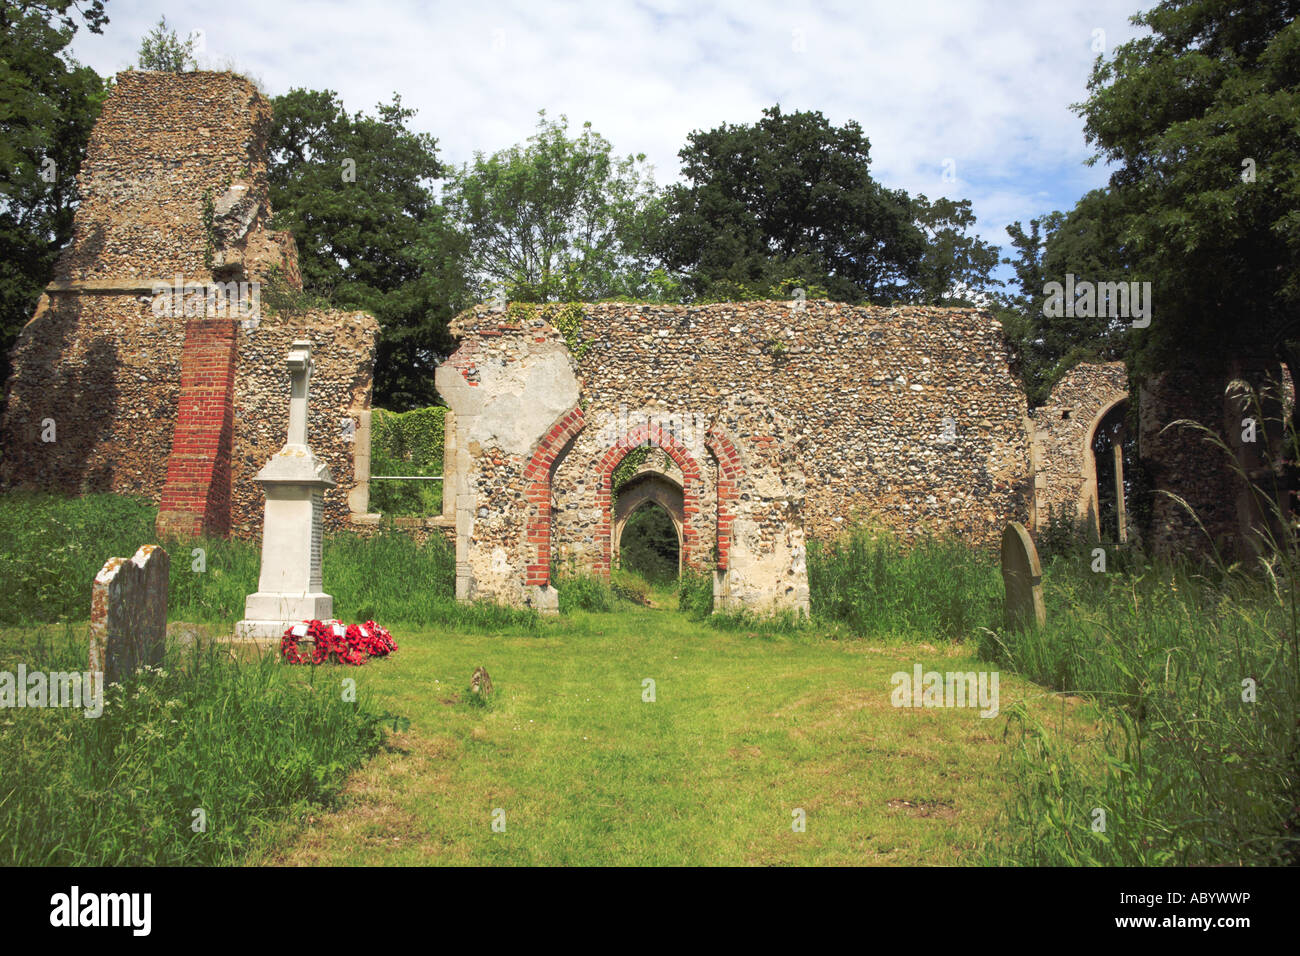 The remains of the tower and walls of the Church of St Mary at Tivetshall St Mary, Norfolk, England, United Kingdom, Europe. Stock Photo